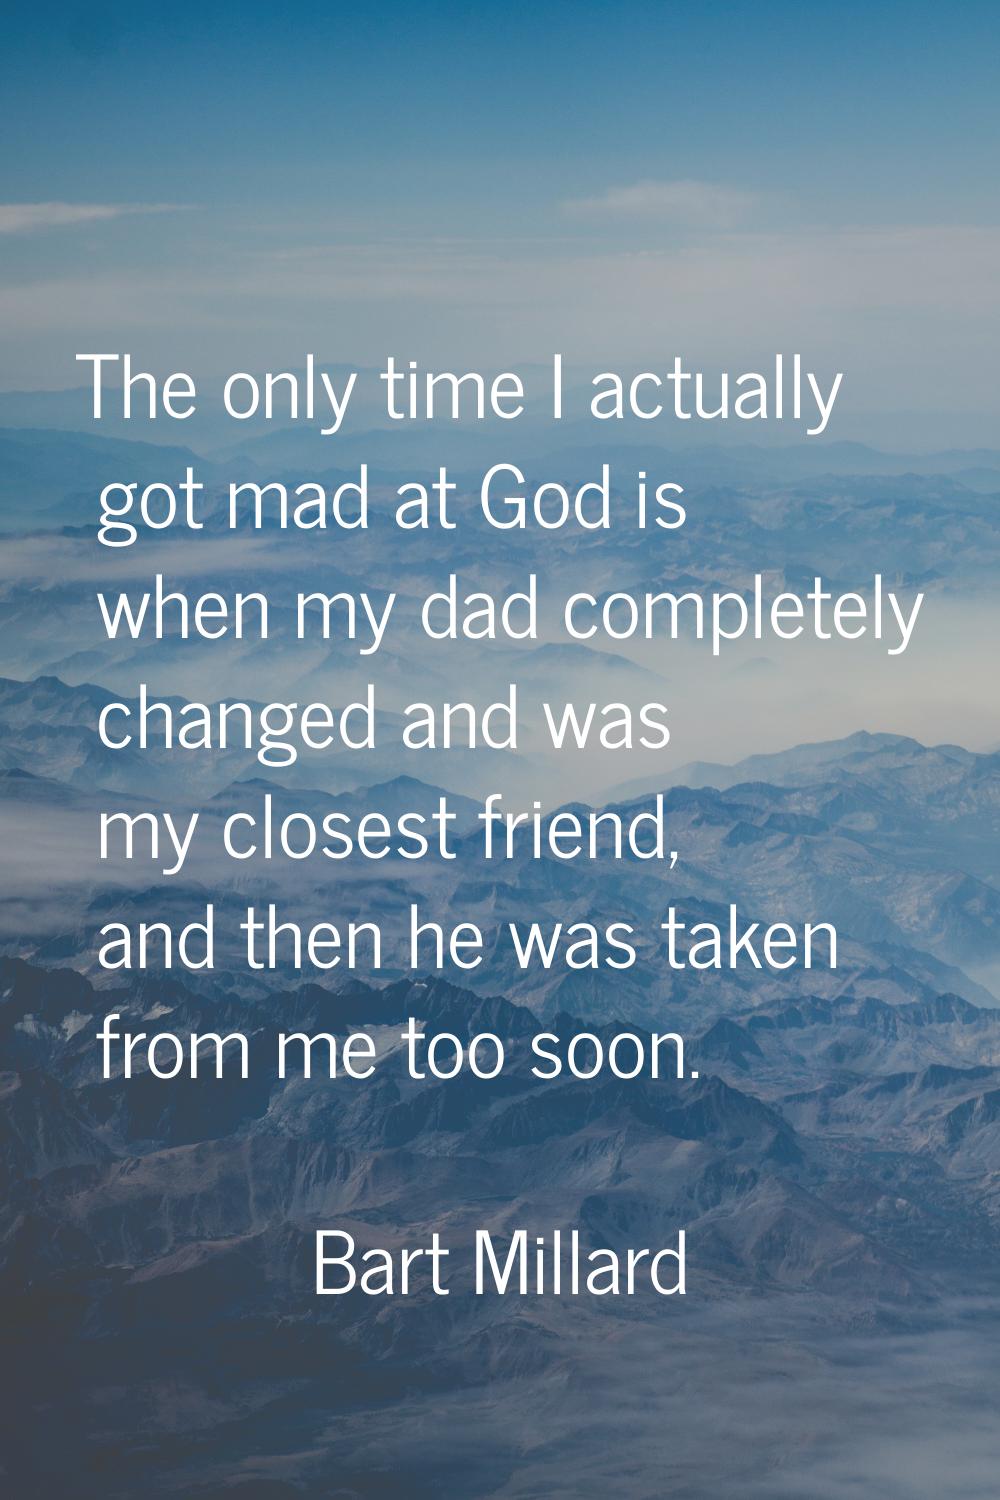 The only time I actually got mad at God is when my dad completely changed and was my closest friend